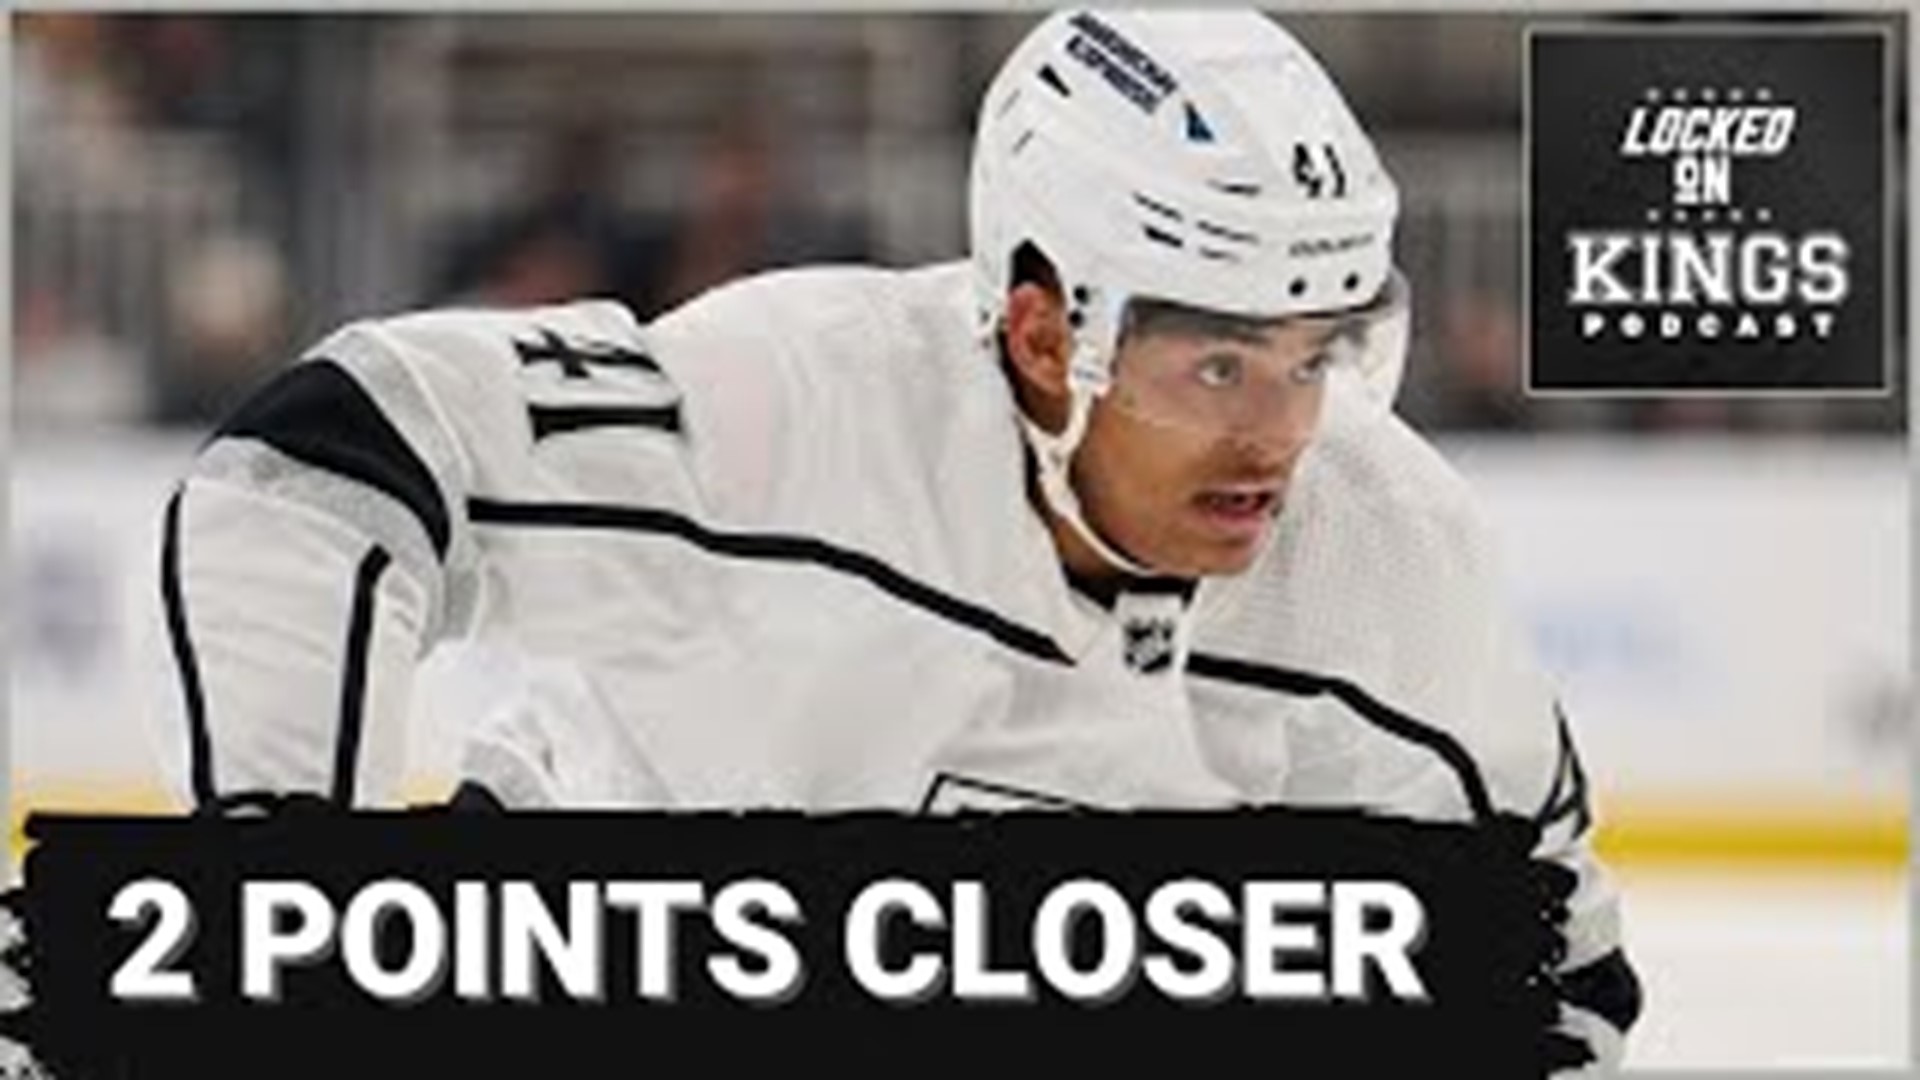 The Kings move two points closer to a playoff spot with a 2-1 win over the Sharks. We discus, the latest playoff positions and get your thoughts on Feedback Friday.